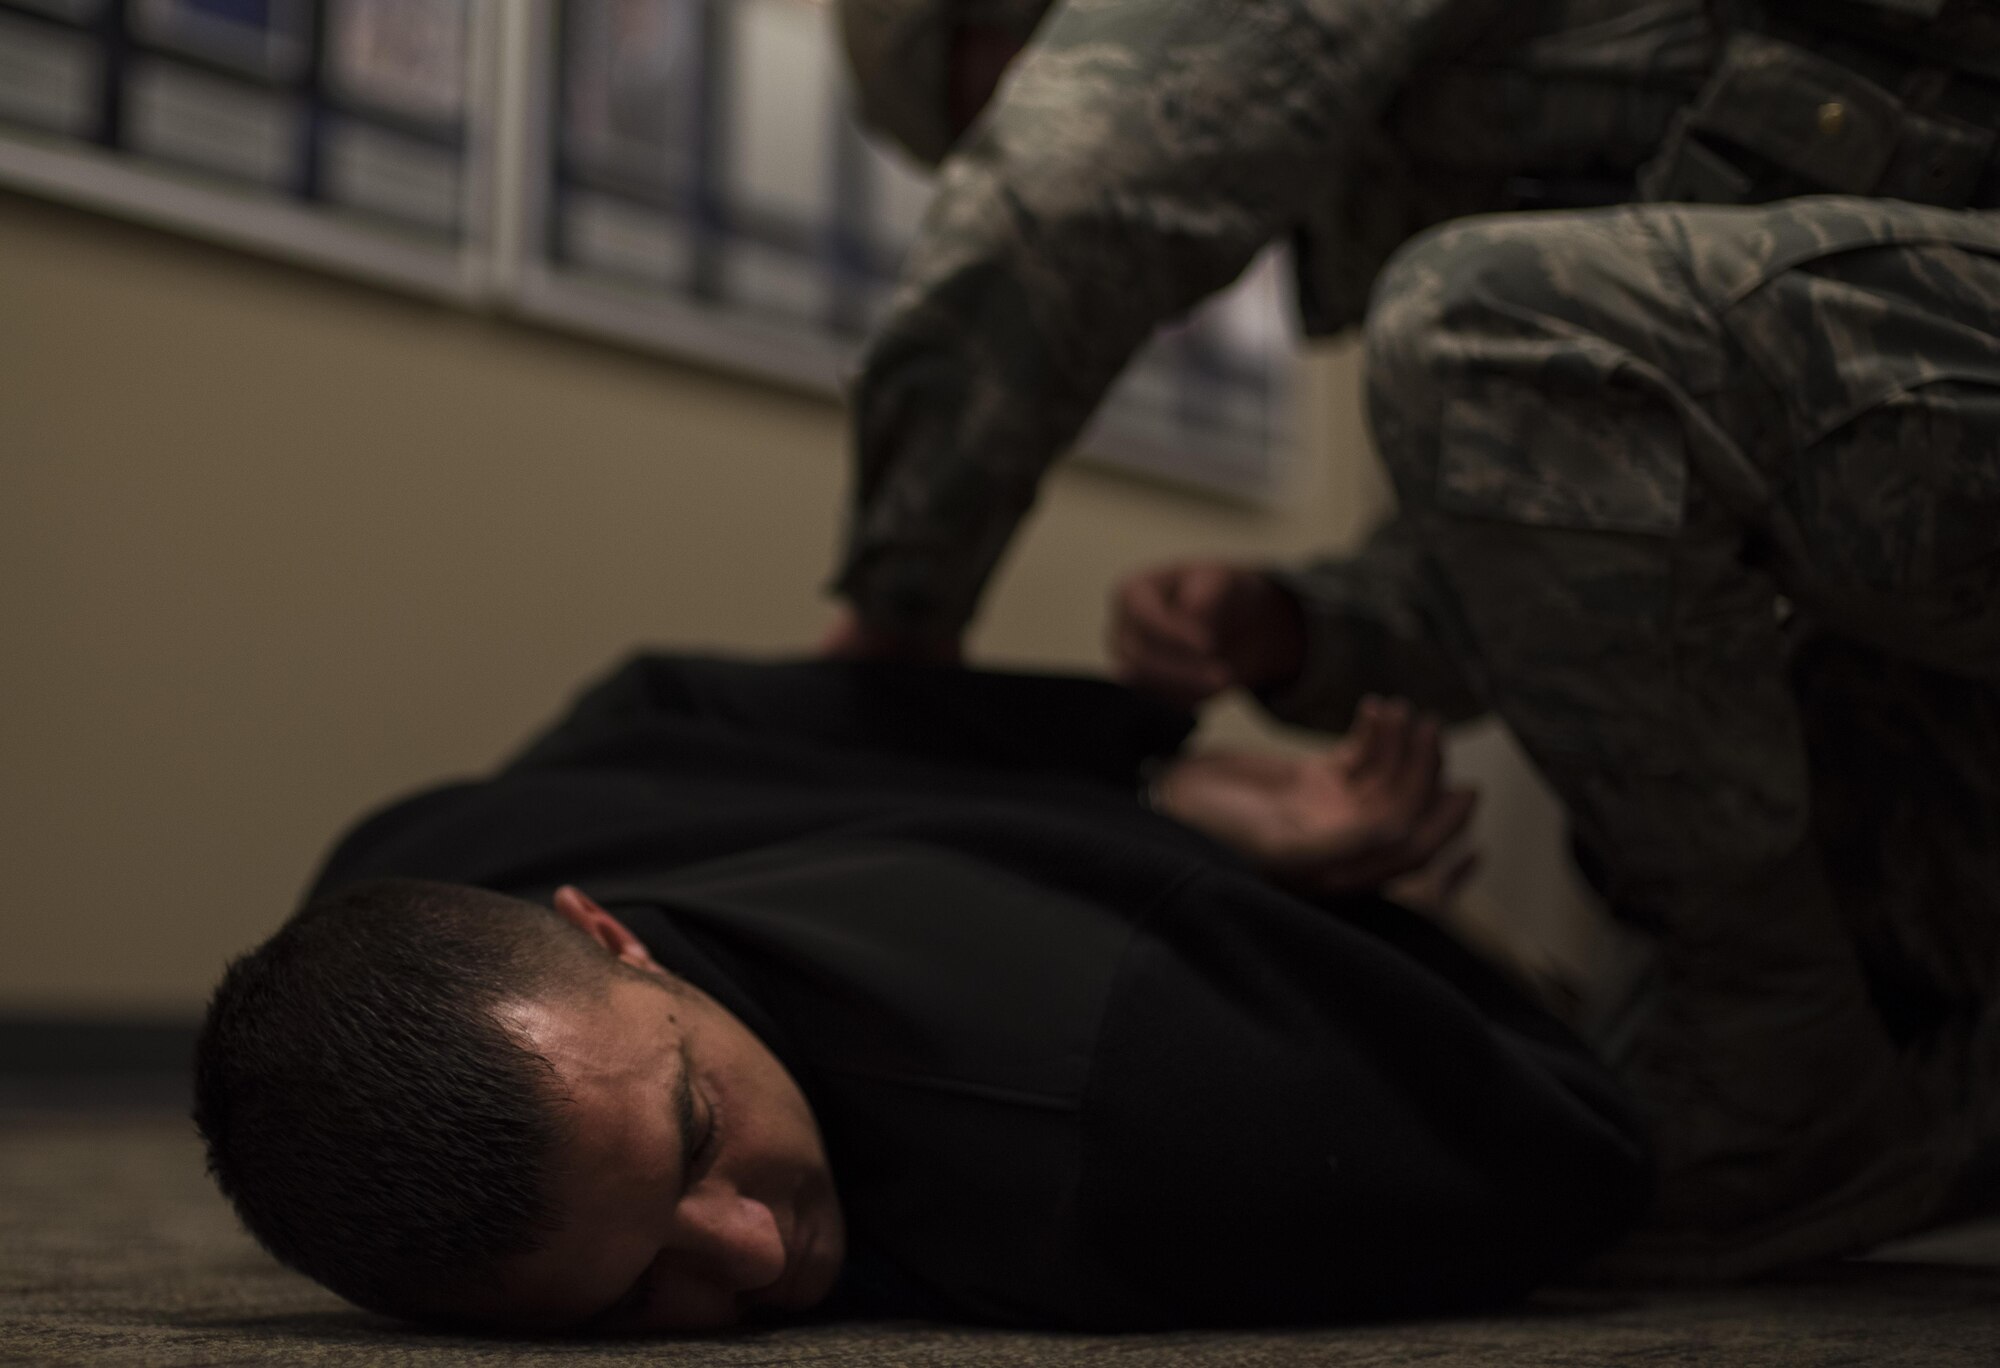 Master Sgt. Jeremy Utphall, 2nd Bomb Wing Inspector General exercise division superintendent, is handcuffed during an active shooter exercise at Barksdale Air Force Base, La., Nov. 29, 2016. Utphall played the role of the active shooter. These types of exercises test how the base responds to any given situation and evaluates base agencies’ response to situations. (U.S. Air Force photo/Senior Airman Damon Kasberg)